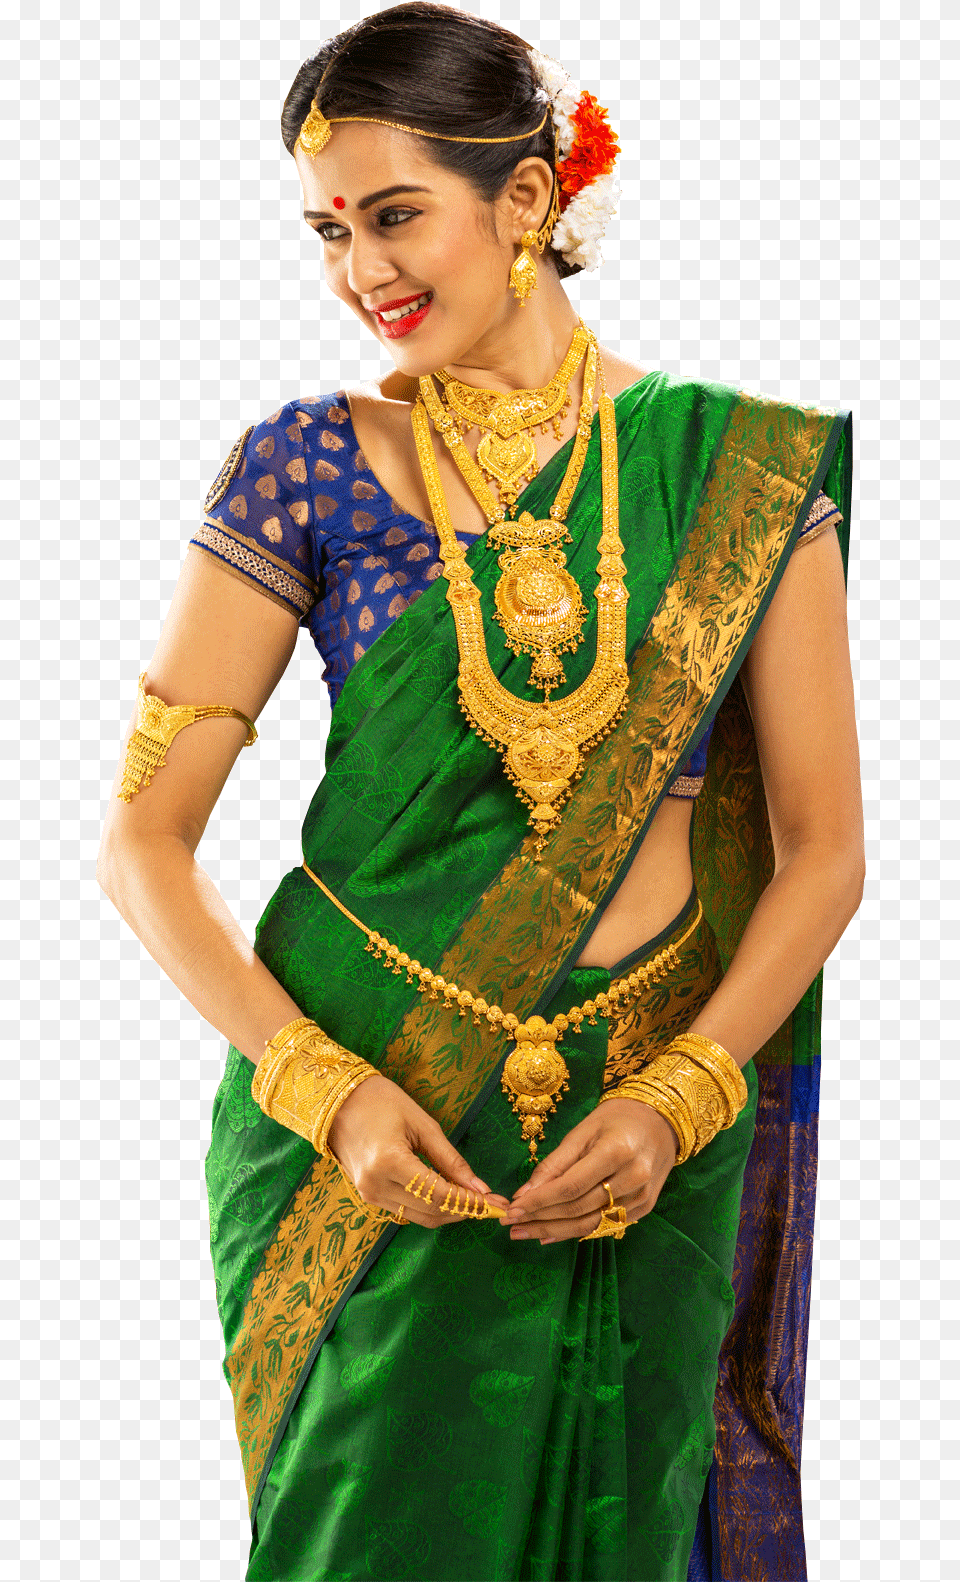 Lalithaa Jewellery Gold Jewellery Model, Accessories, Jewelry, Ornament, Adult Png